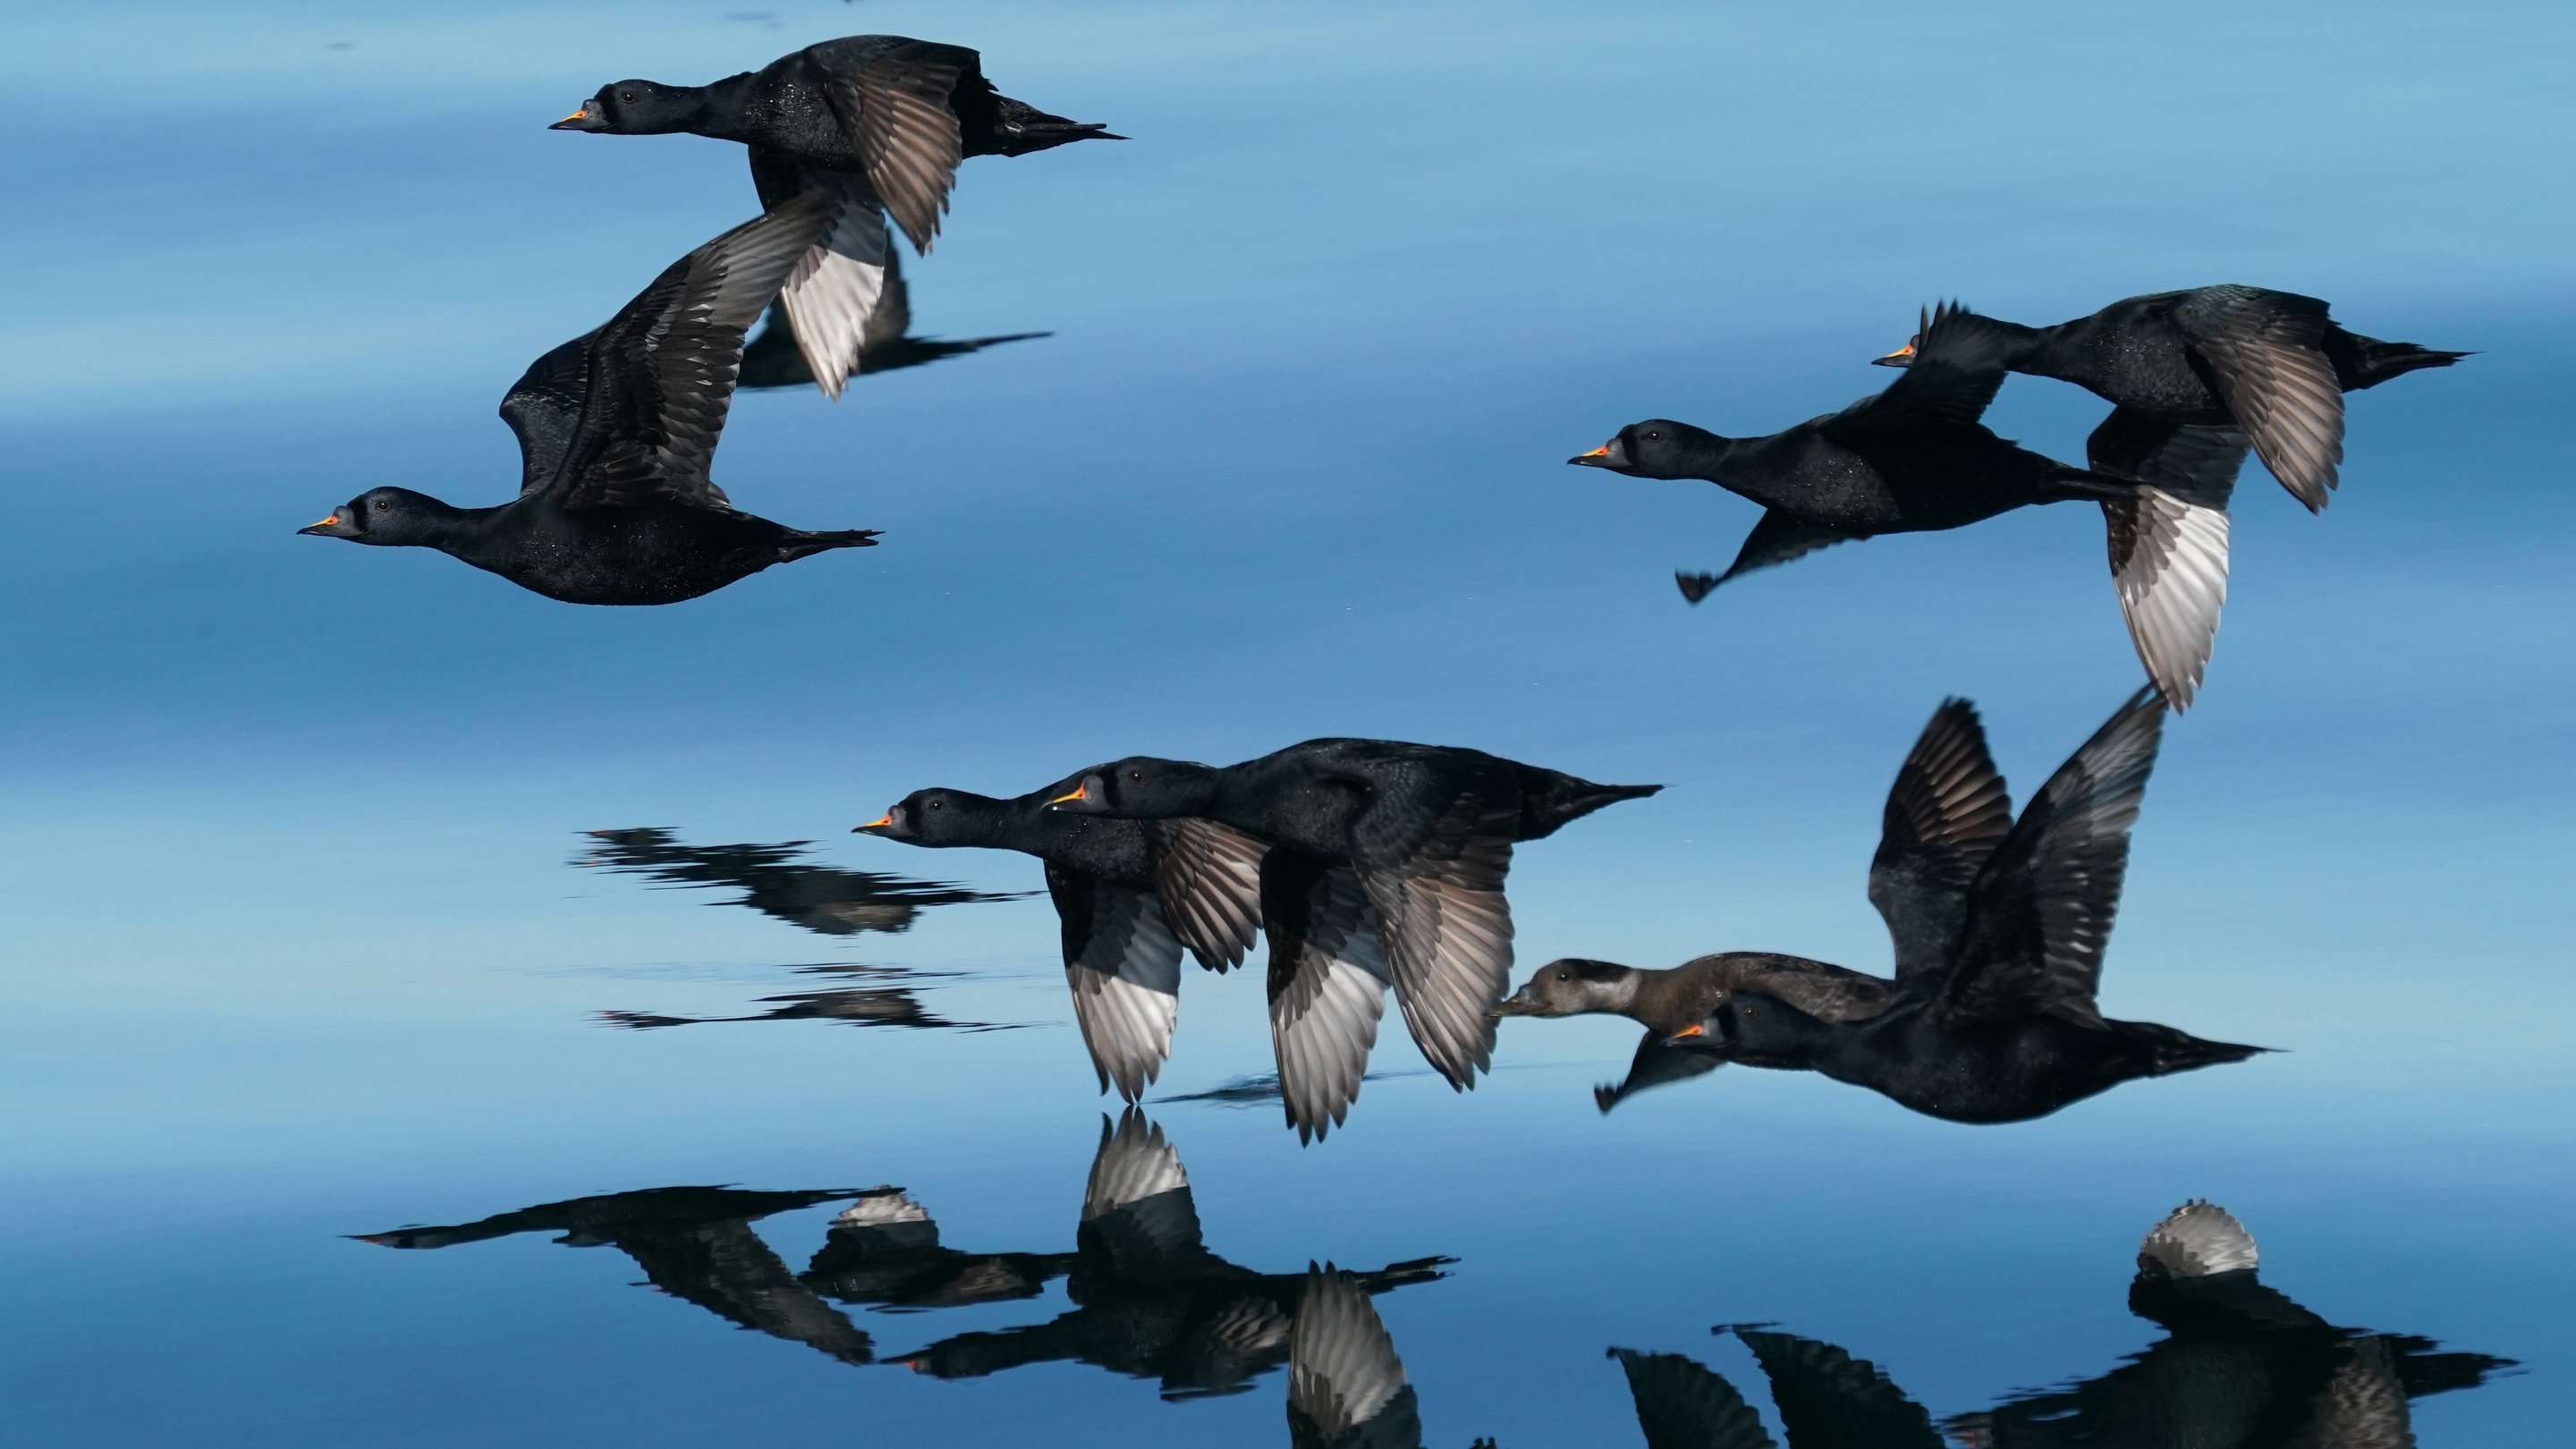 Eight Common Scoters fly low over a mirror-smooth water surface to the left.  